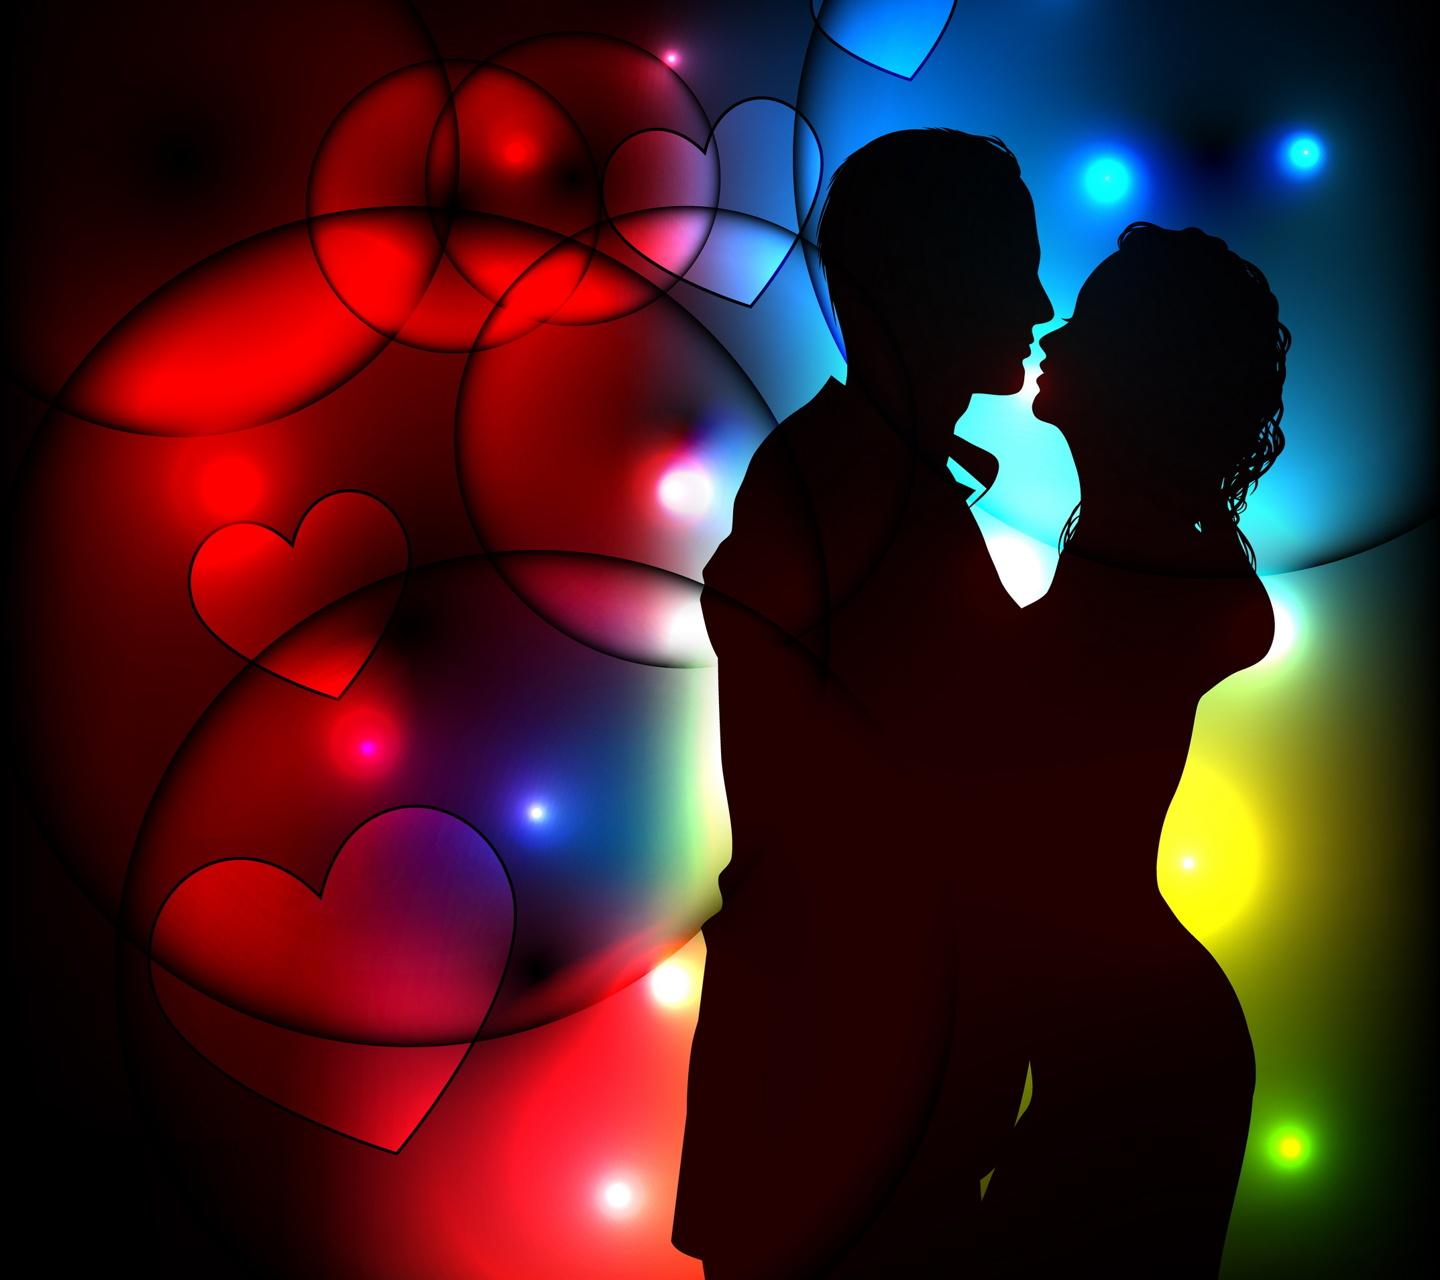 Loving And Dancing Couple Hd Wallpaper For Mobile - Dancing Couple Images Hd , HD Wallpaper & Backgrounds